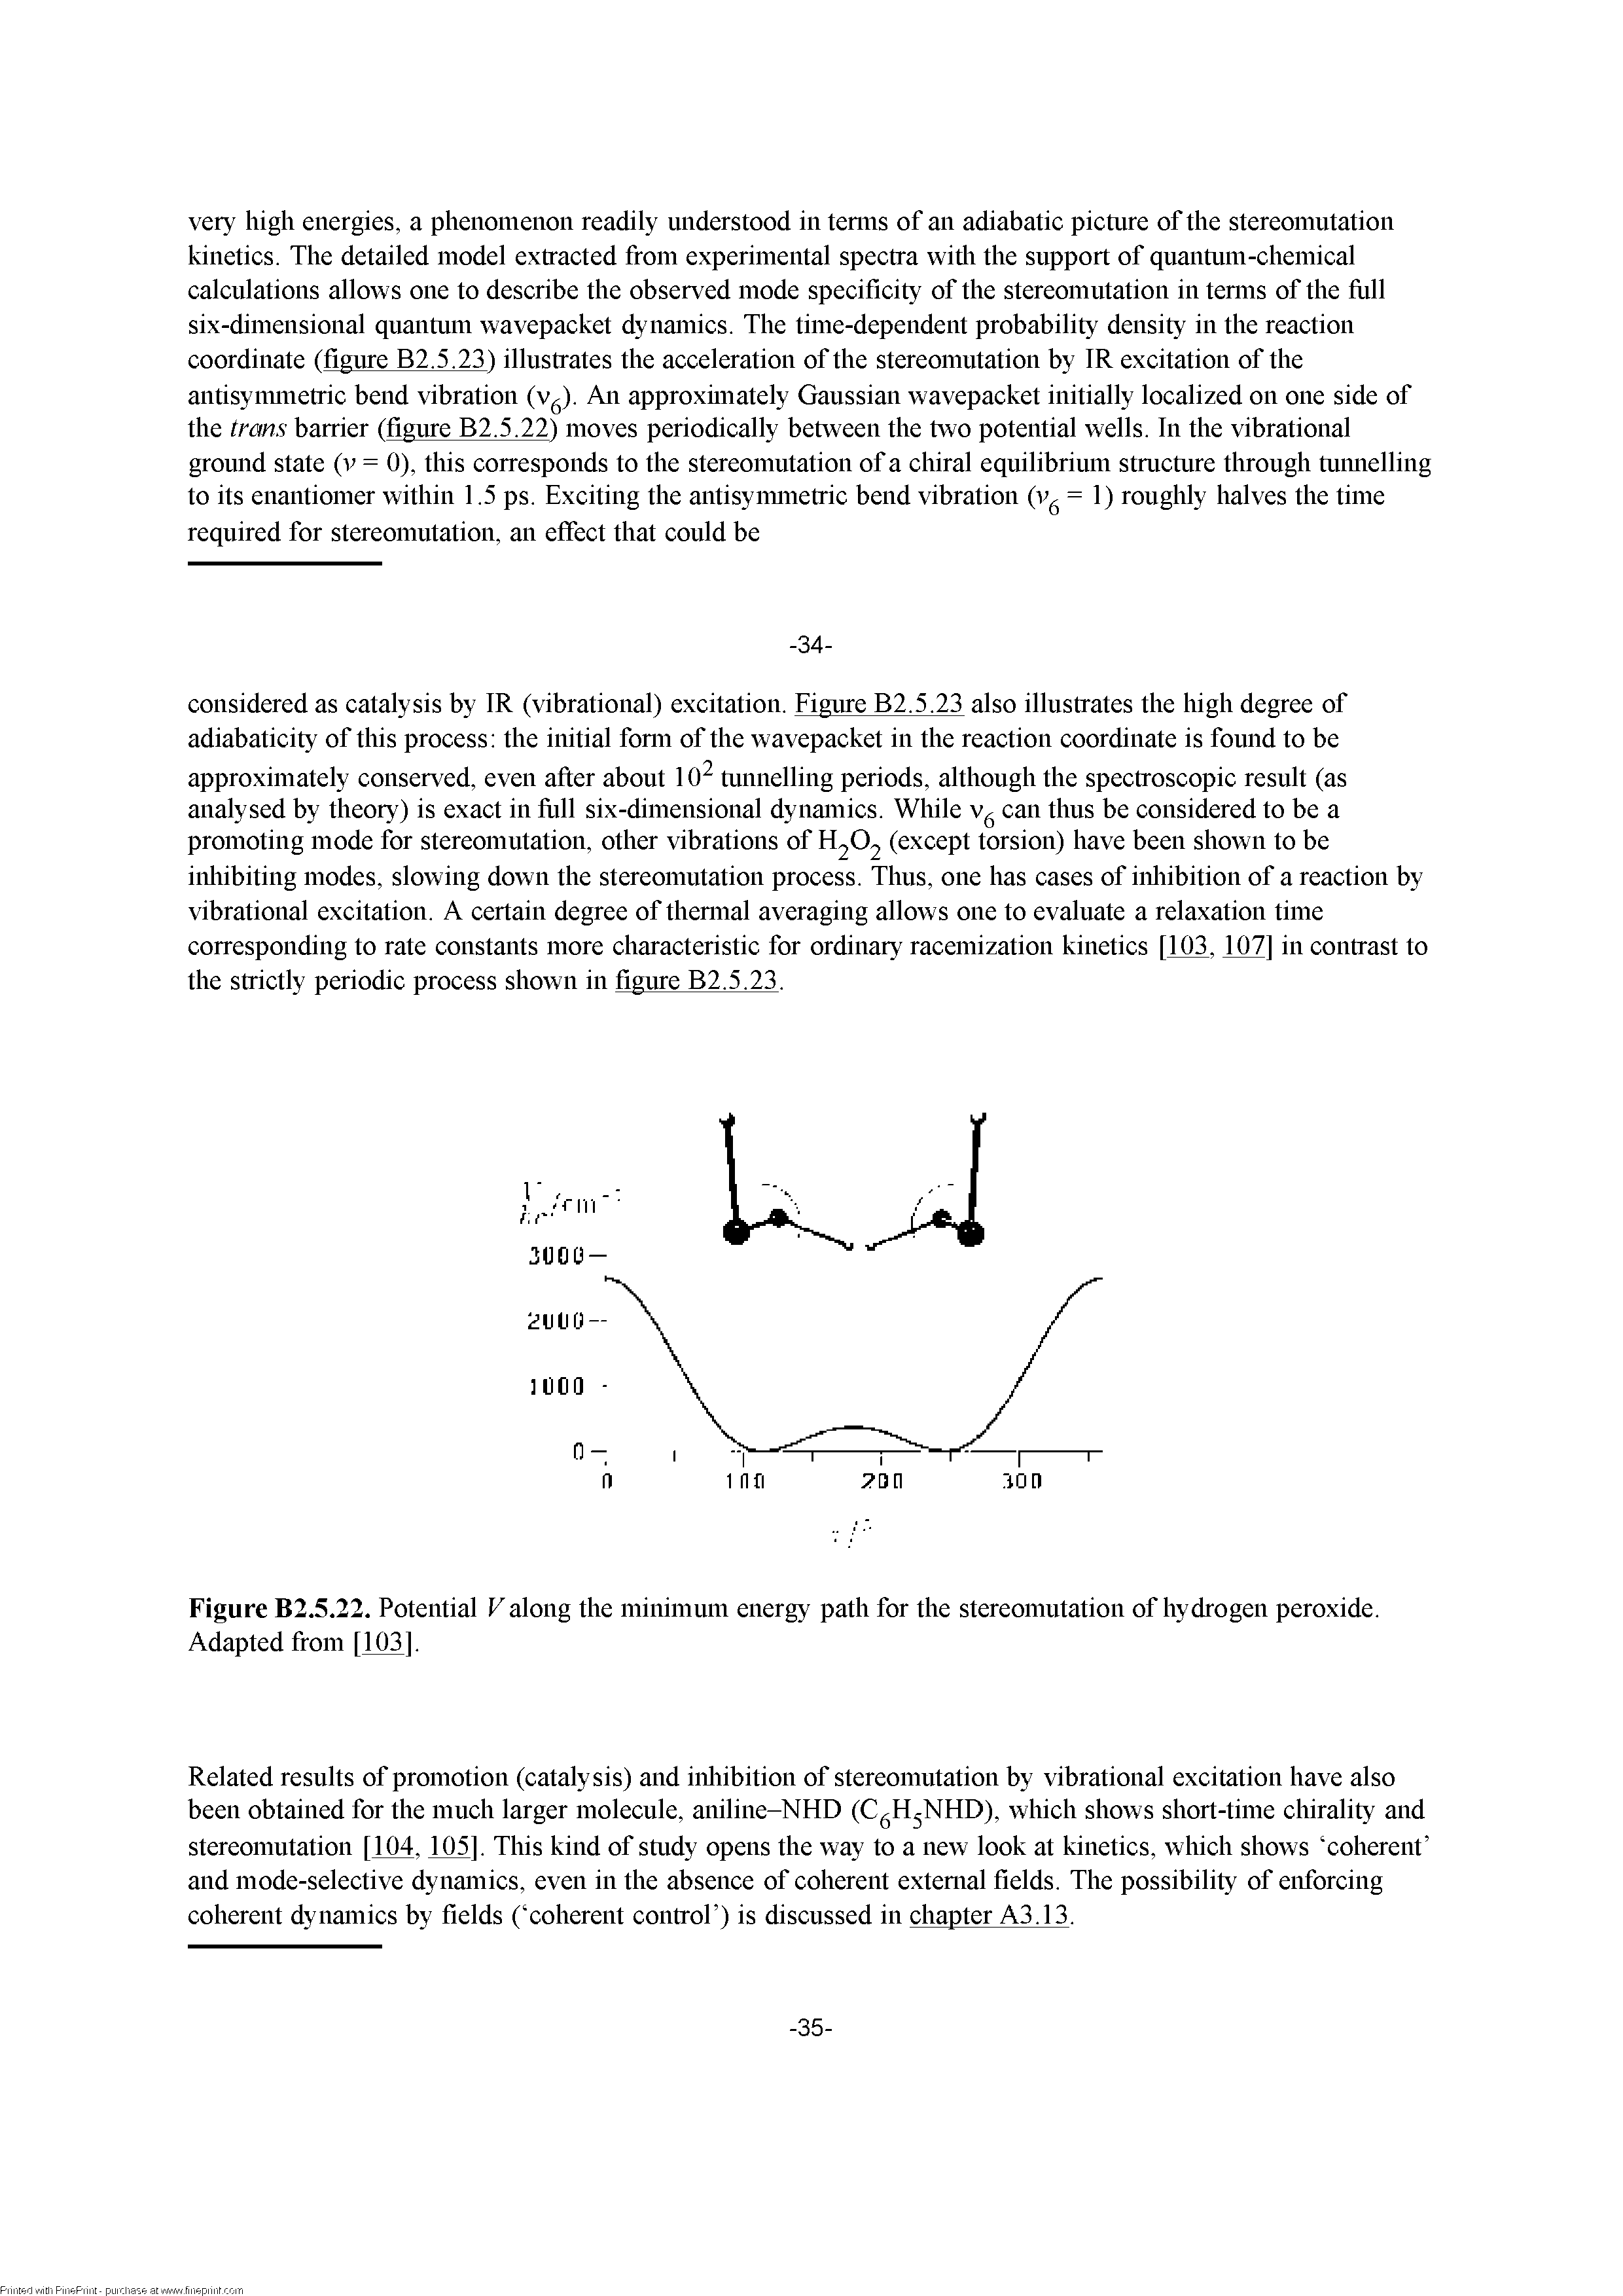 Figure B2.5.22. Potential V along the minimum energy path for the stereonuitation of hydrogen peroxide. Adapted from [103].